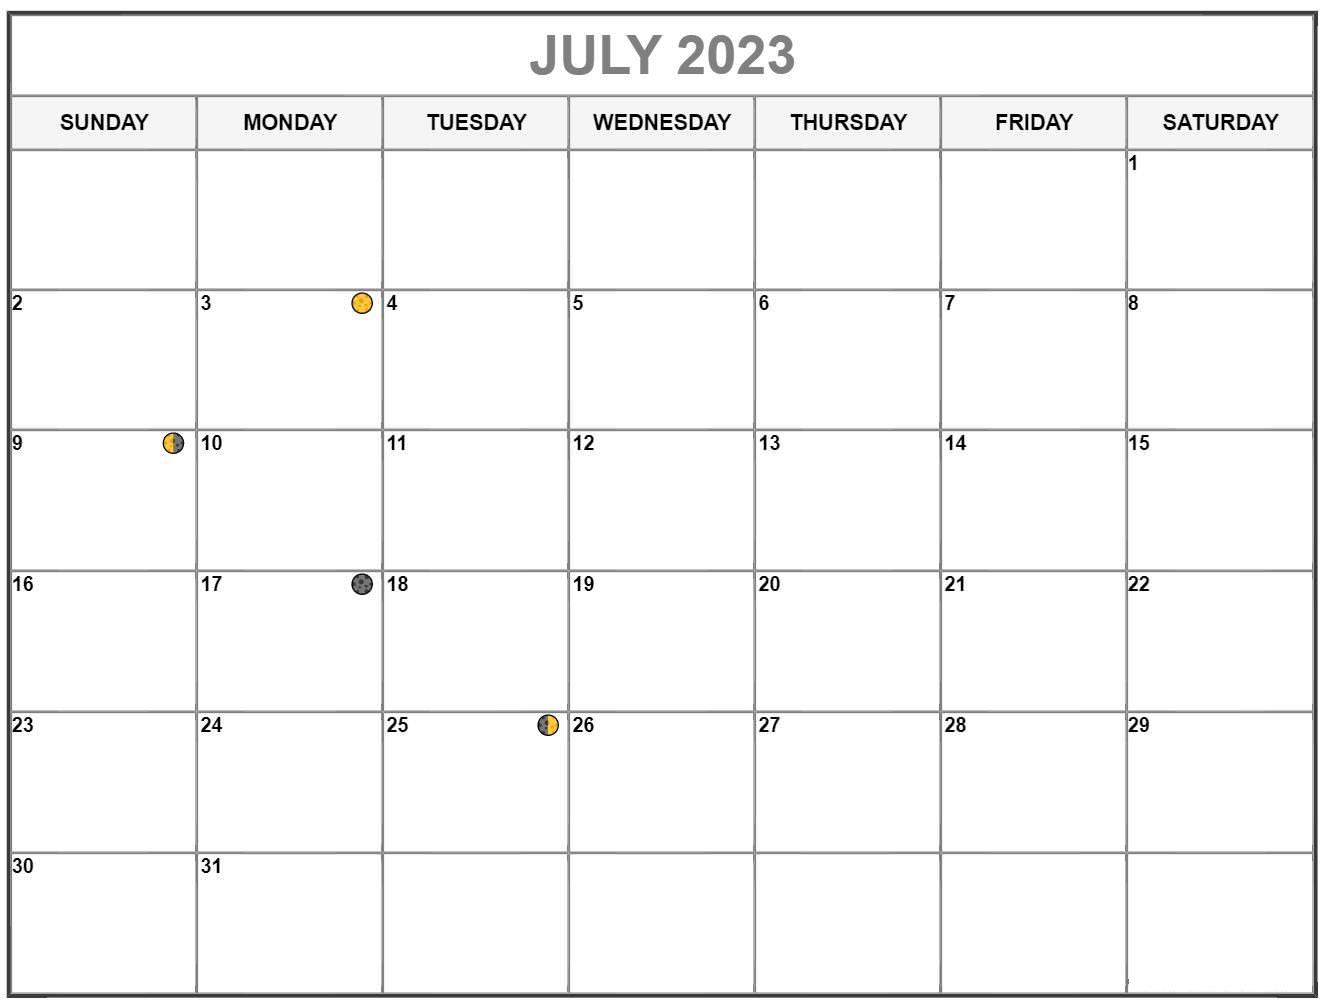 Free July 2023 Calendar Template With Lunar Phases